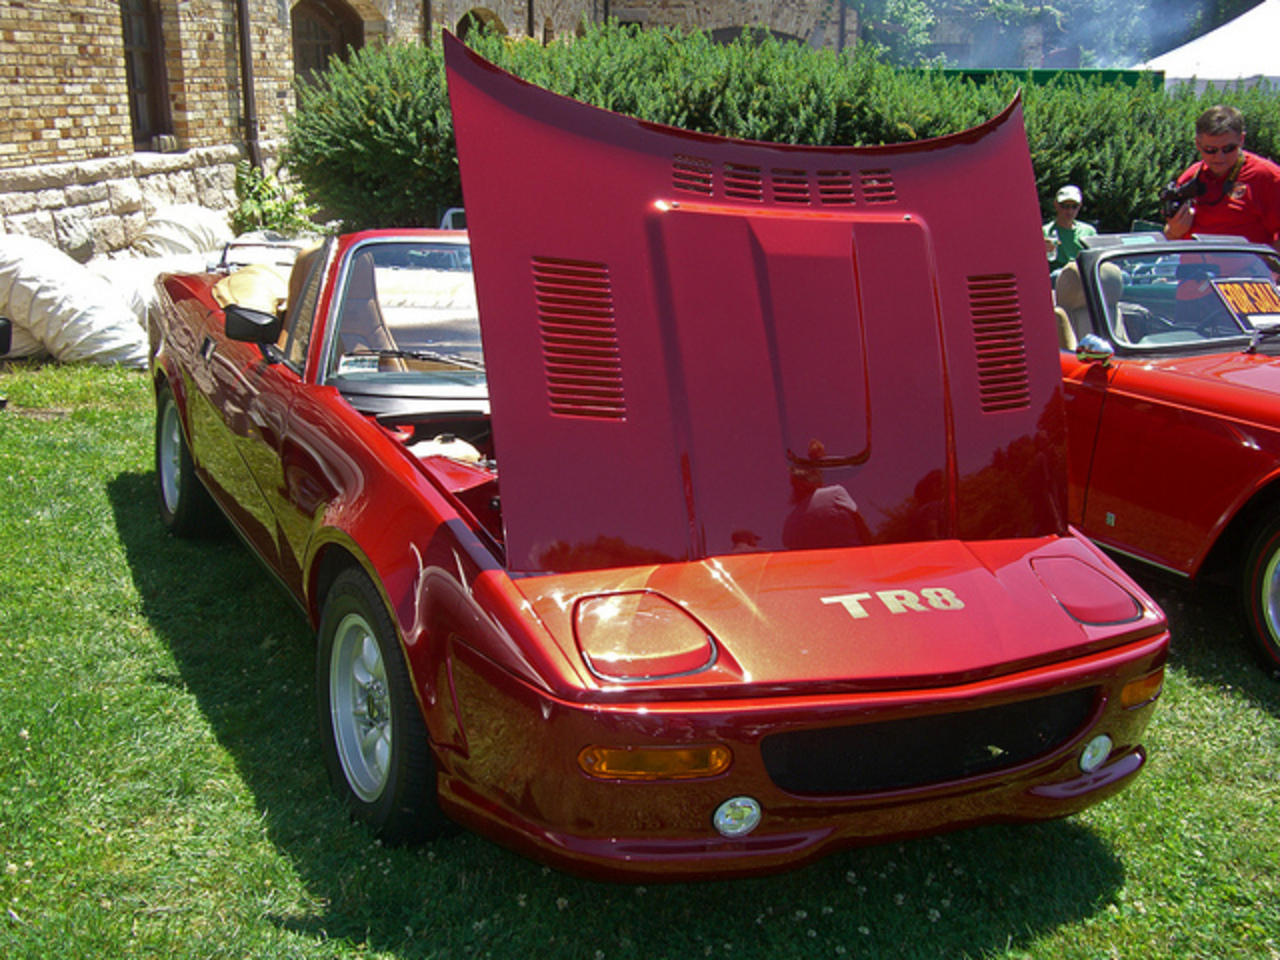 Triumph TR8 with body kit | Flickr - Photo Sharing!